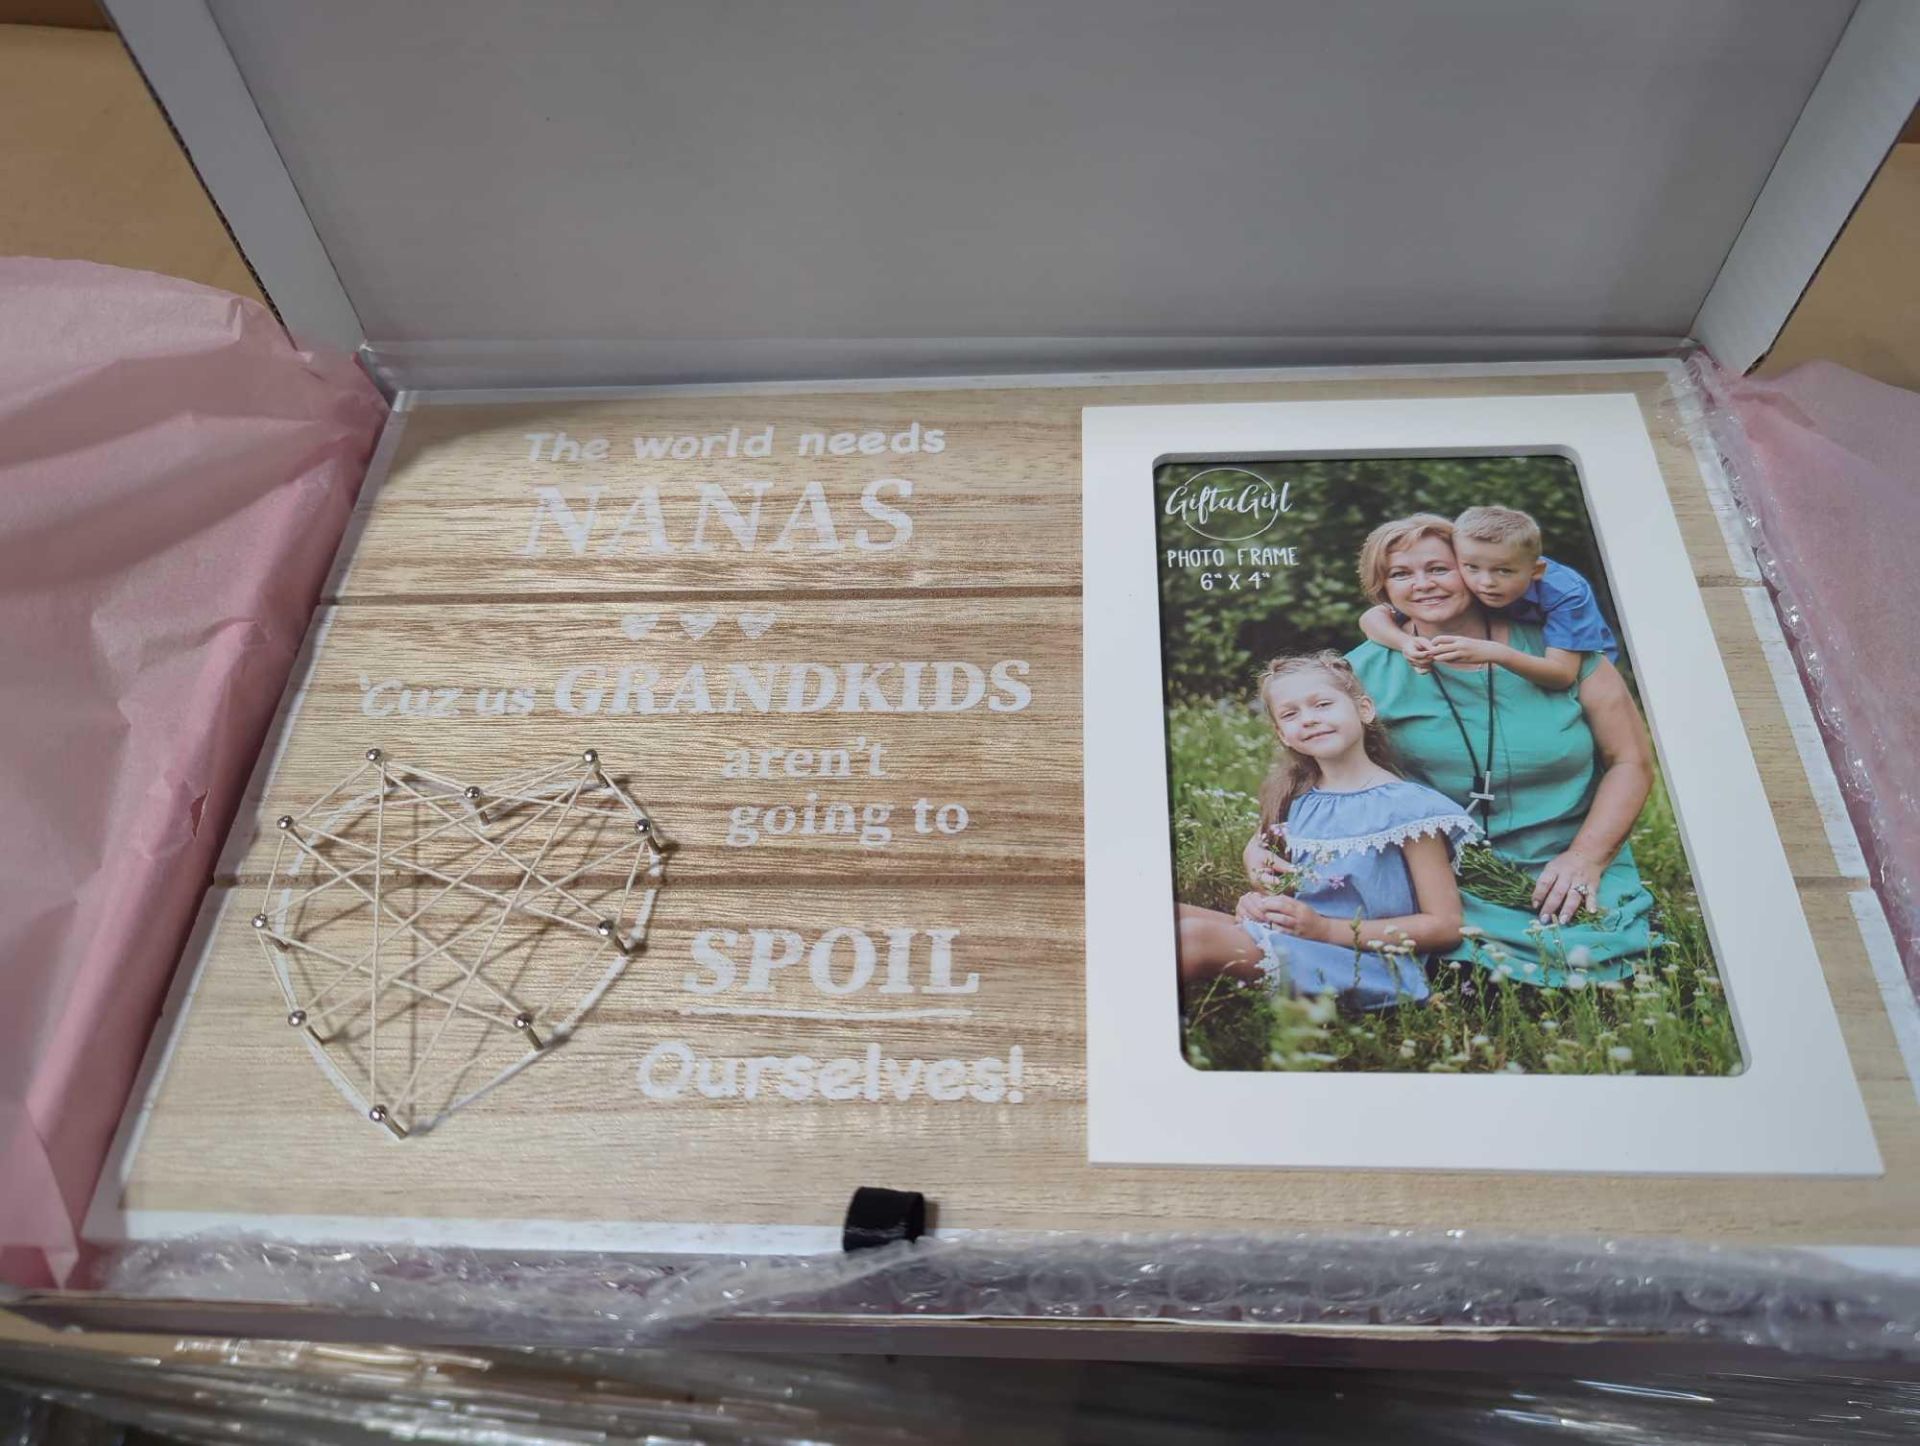 Pallet- Decor: The World needs Nanas 'coz us grandkids arent going to spoil ourselves! - Image 3 of 6